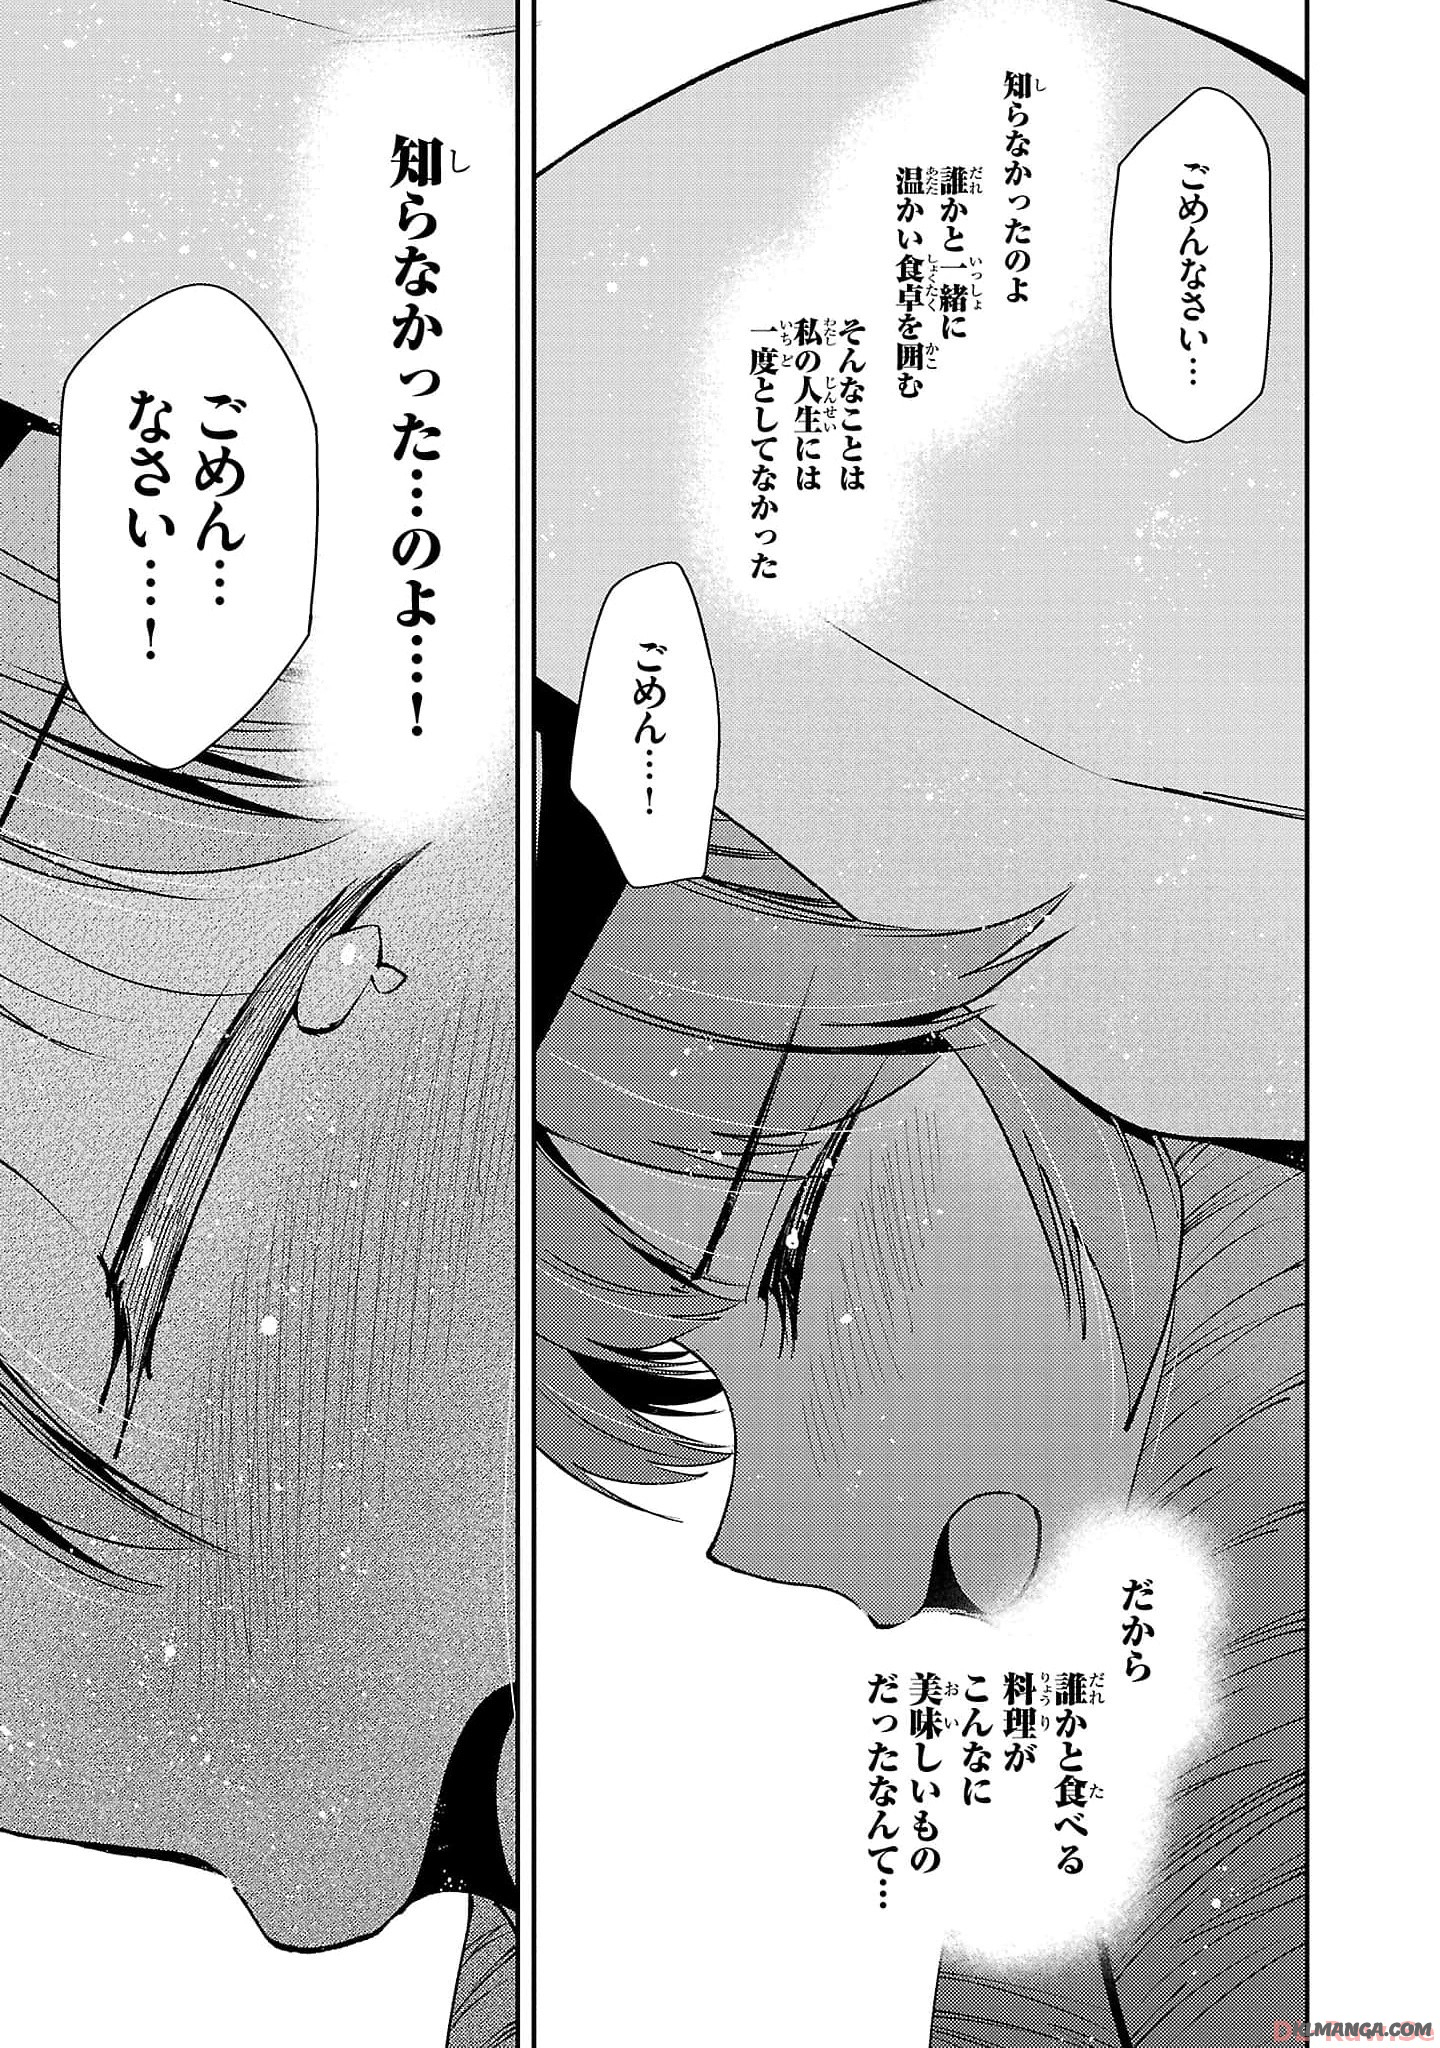 Hungry Saint and Full-Stomach Witch's Slow Life in Another World! 腹ペコ聖女とまんぷく魔女の異世界スローライフ! 第22話 - Page 23